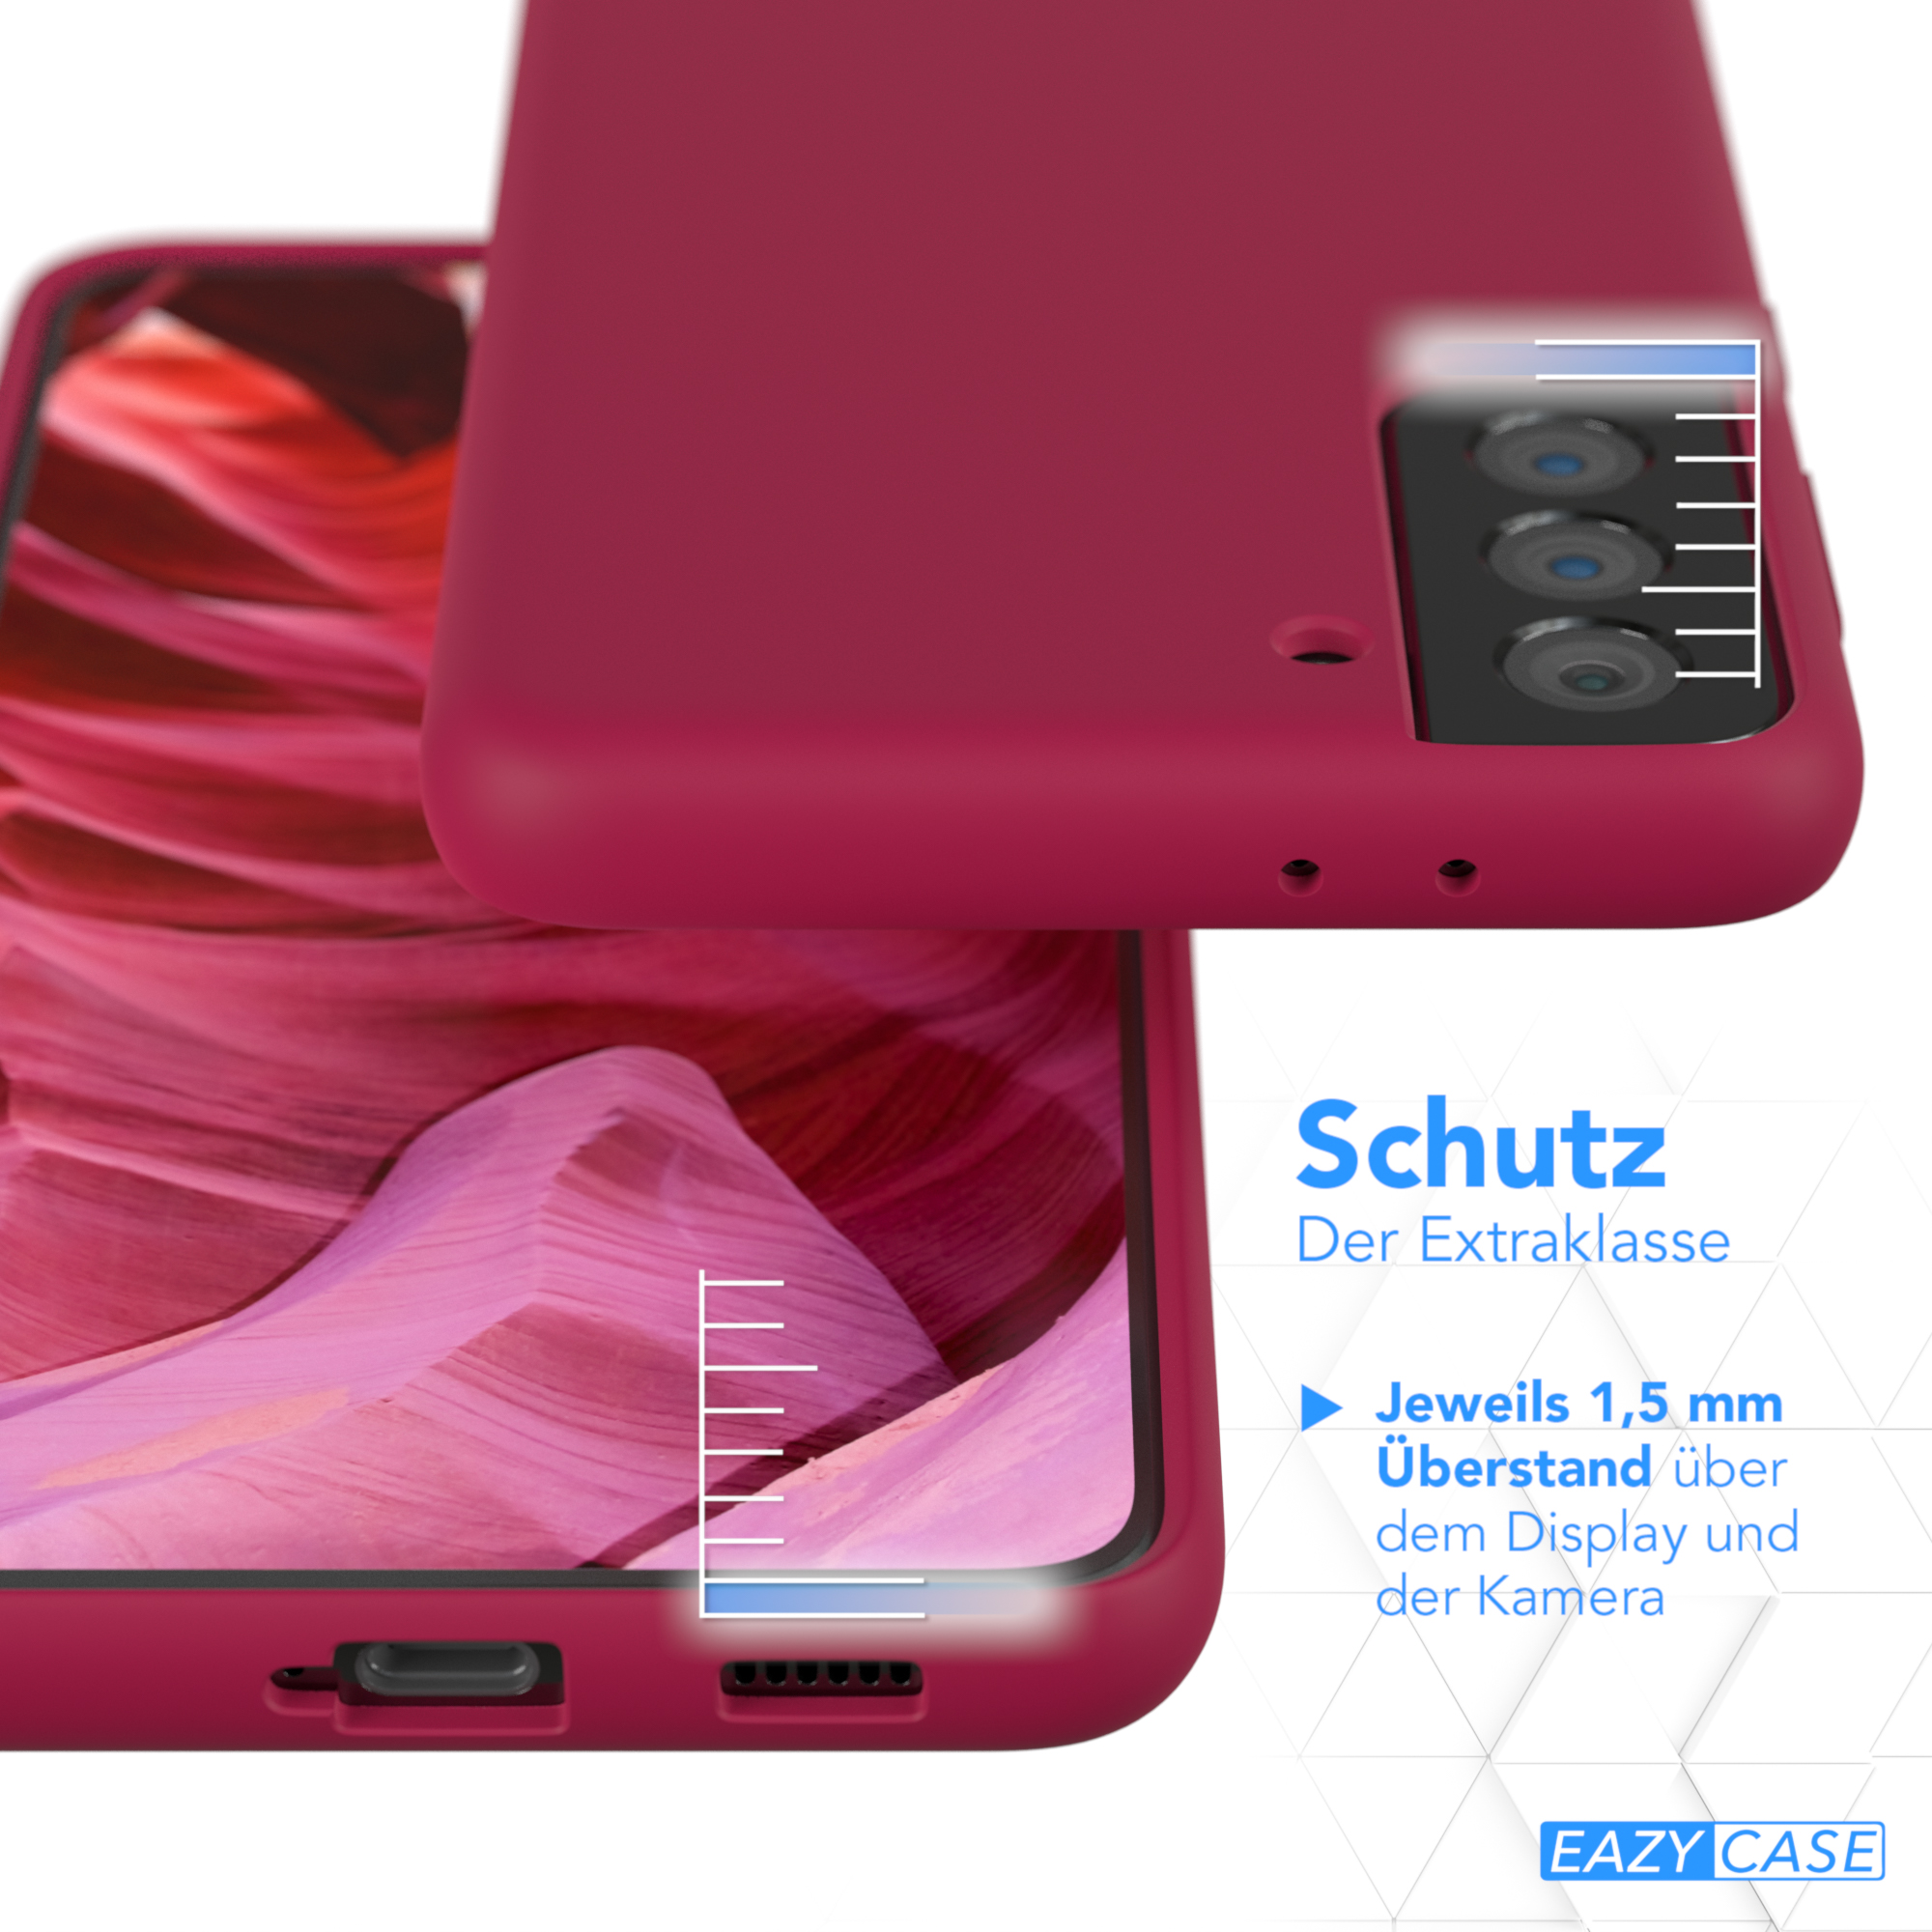 Rot Plus S21 Premium Handycase, Galaxy Beere EAZY / CASE 5G, Samsung, Backcover, Silikon